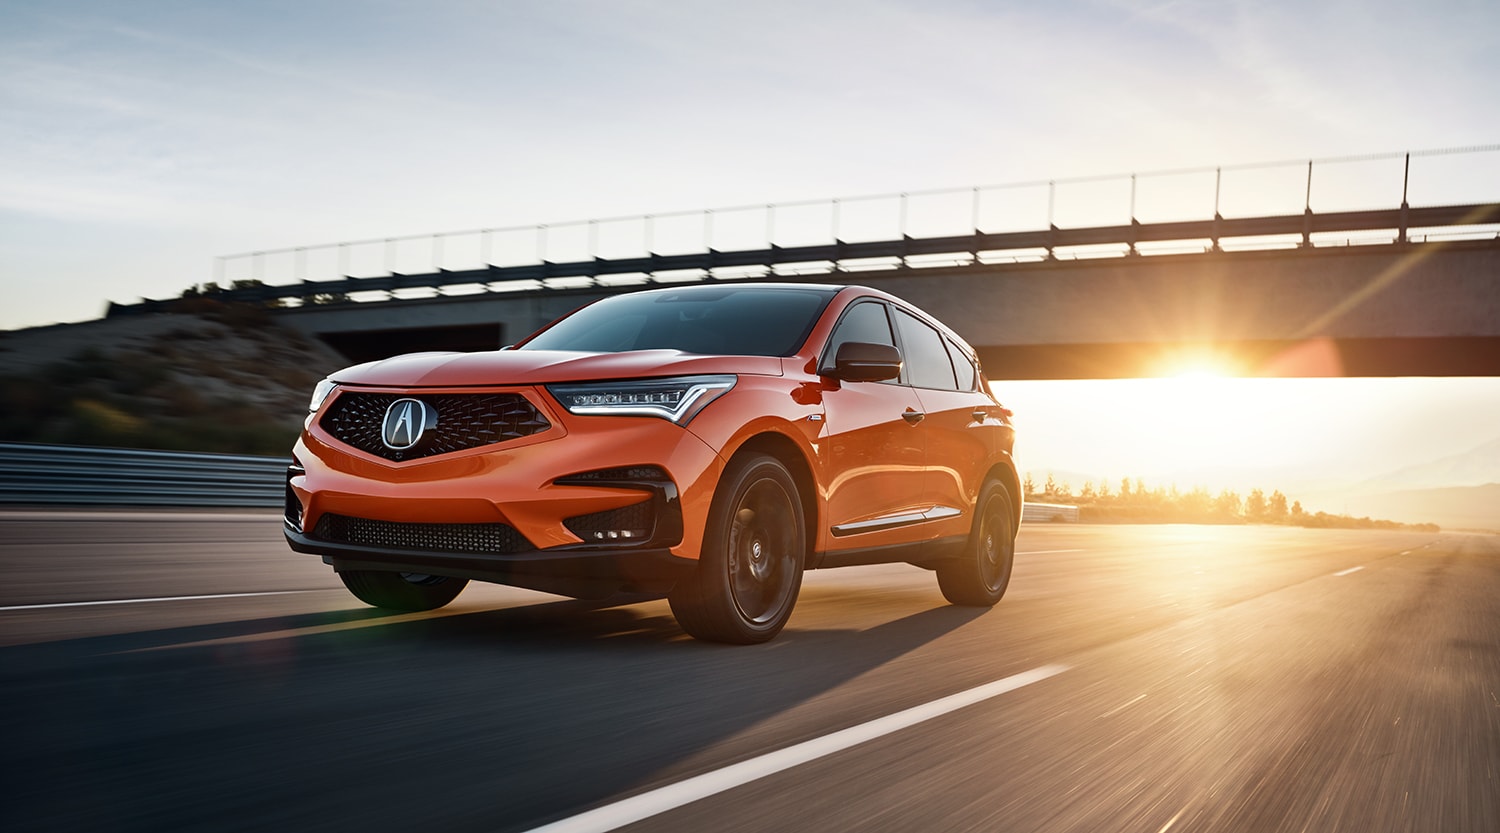 Bobby Rahal Acura is a Car Dealership near New Cumberland PA | The 2021 Acura RDX driving on highway